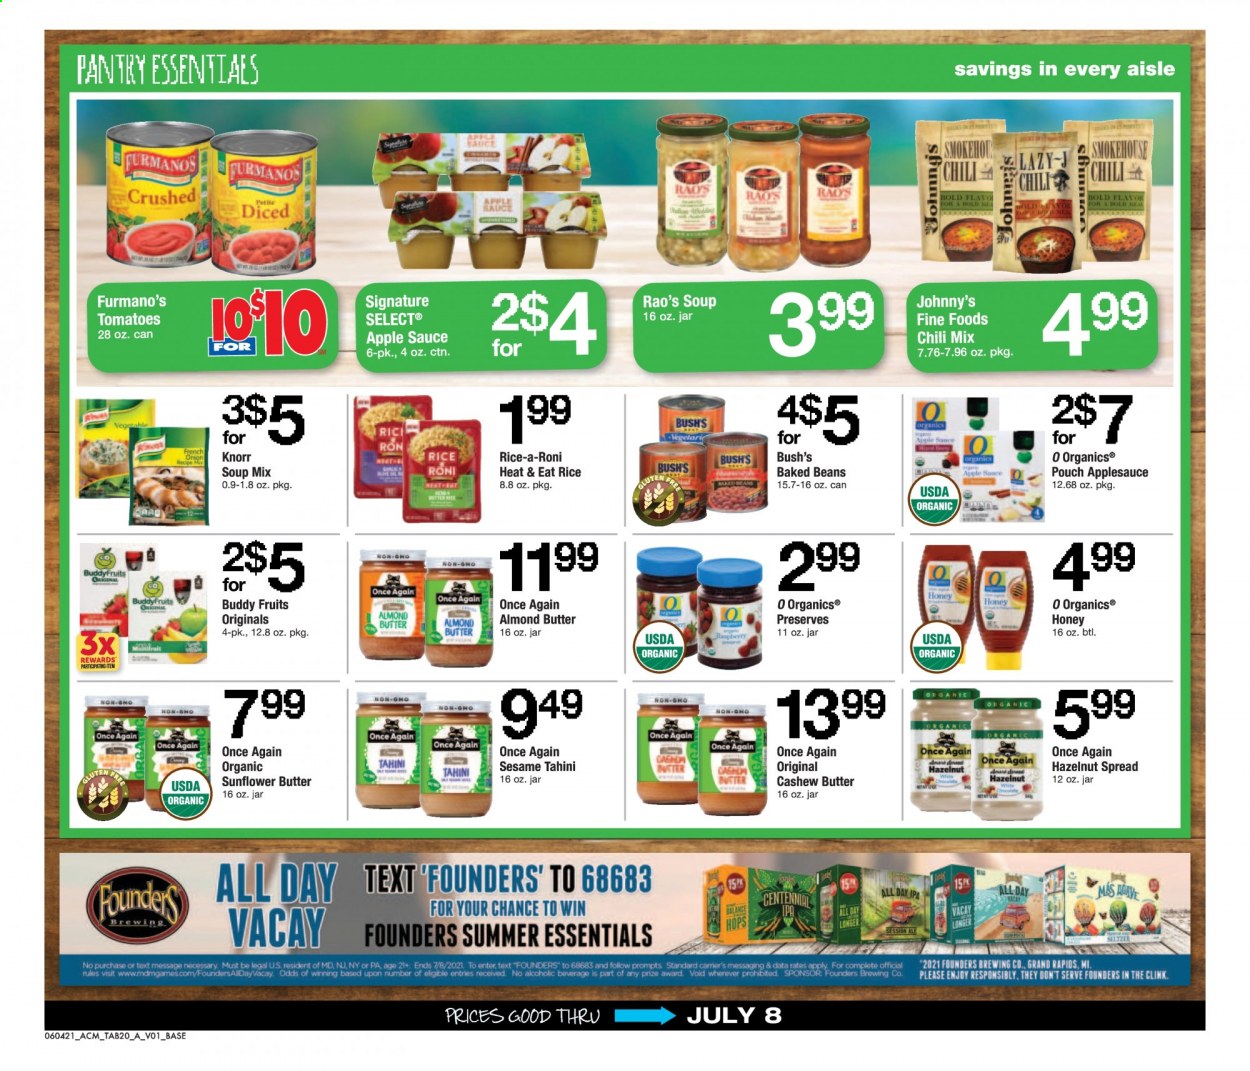 thumbnail - ACME Flyer - 06/04/2021 - 07/08/2021 - Sales products - beans, tomatoes, soup mix, soup, Knorr, sauce, almond butter, baked beans, rice, tahini, apple sauce, cashew cream, hazelnut spread, seltzer water, Ron Pelicano, IPA, Omo, pan. Page 20.